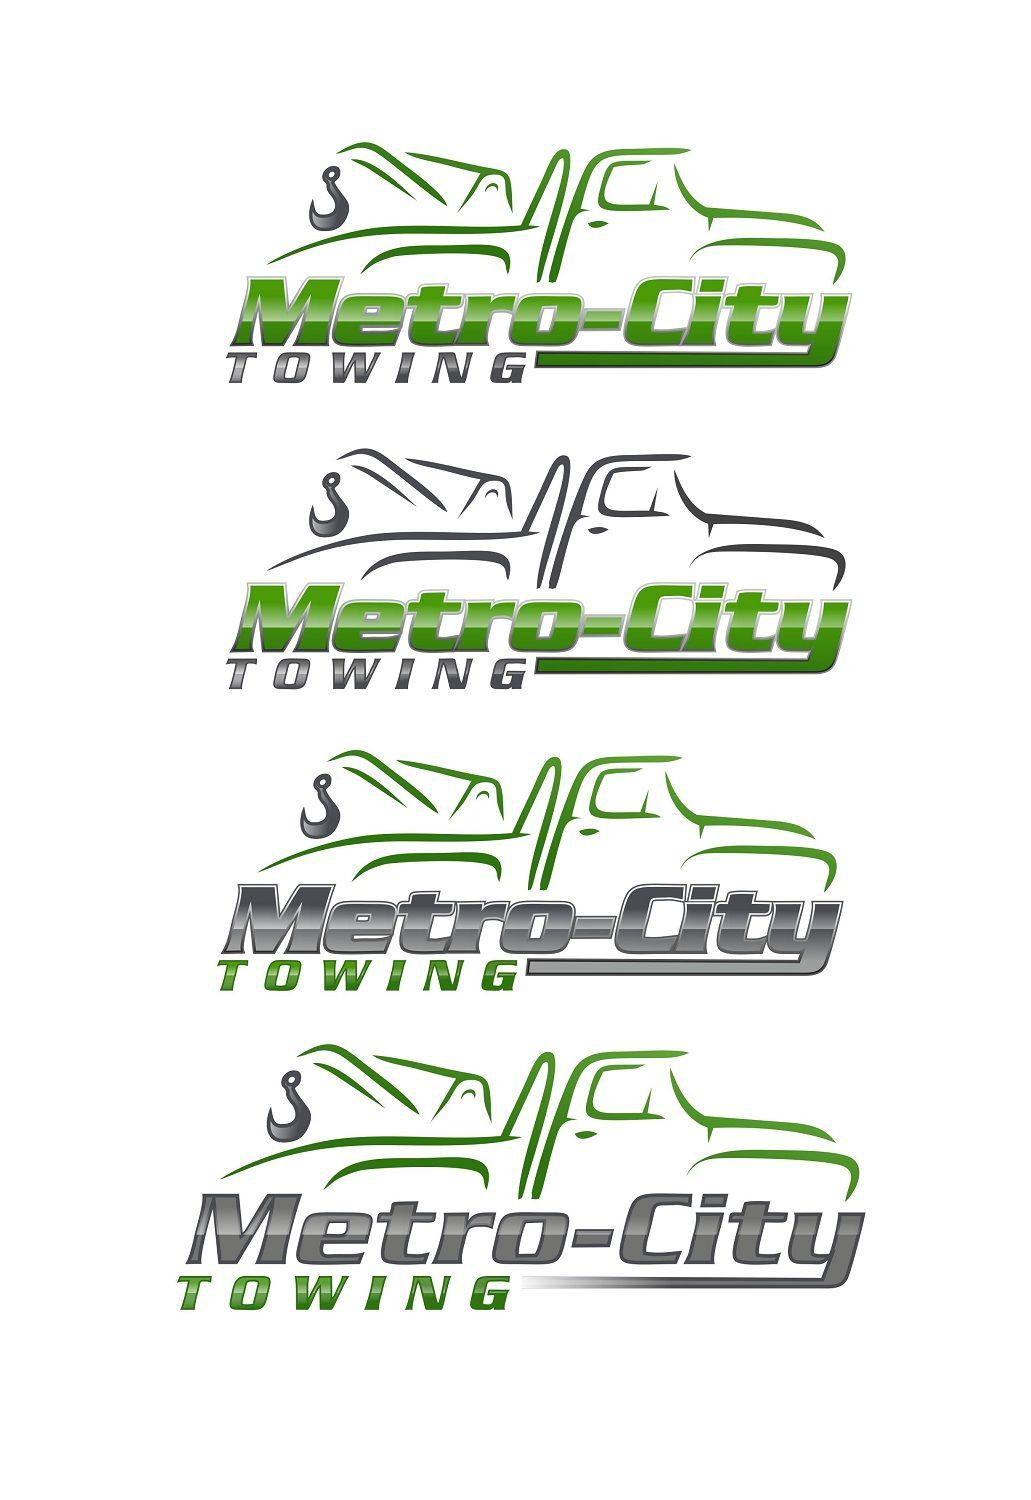 Sleek Truck Logo - Metro City Towing Graphic Design By Roman.free, It's Tow Truck